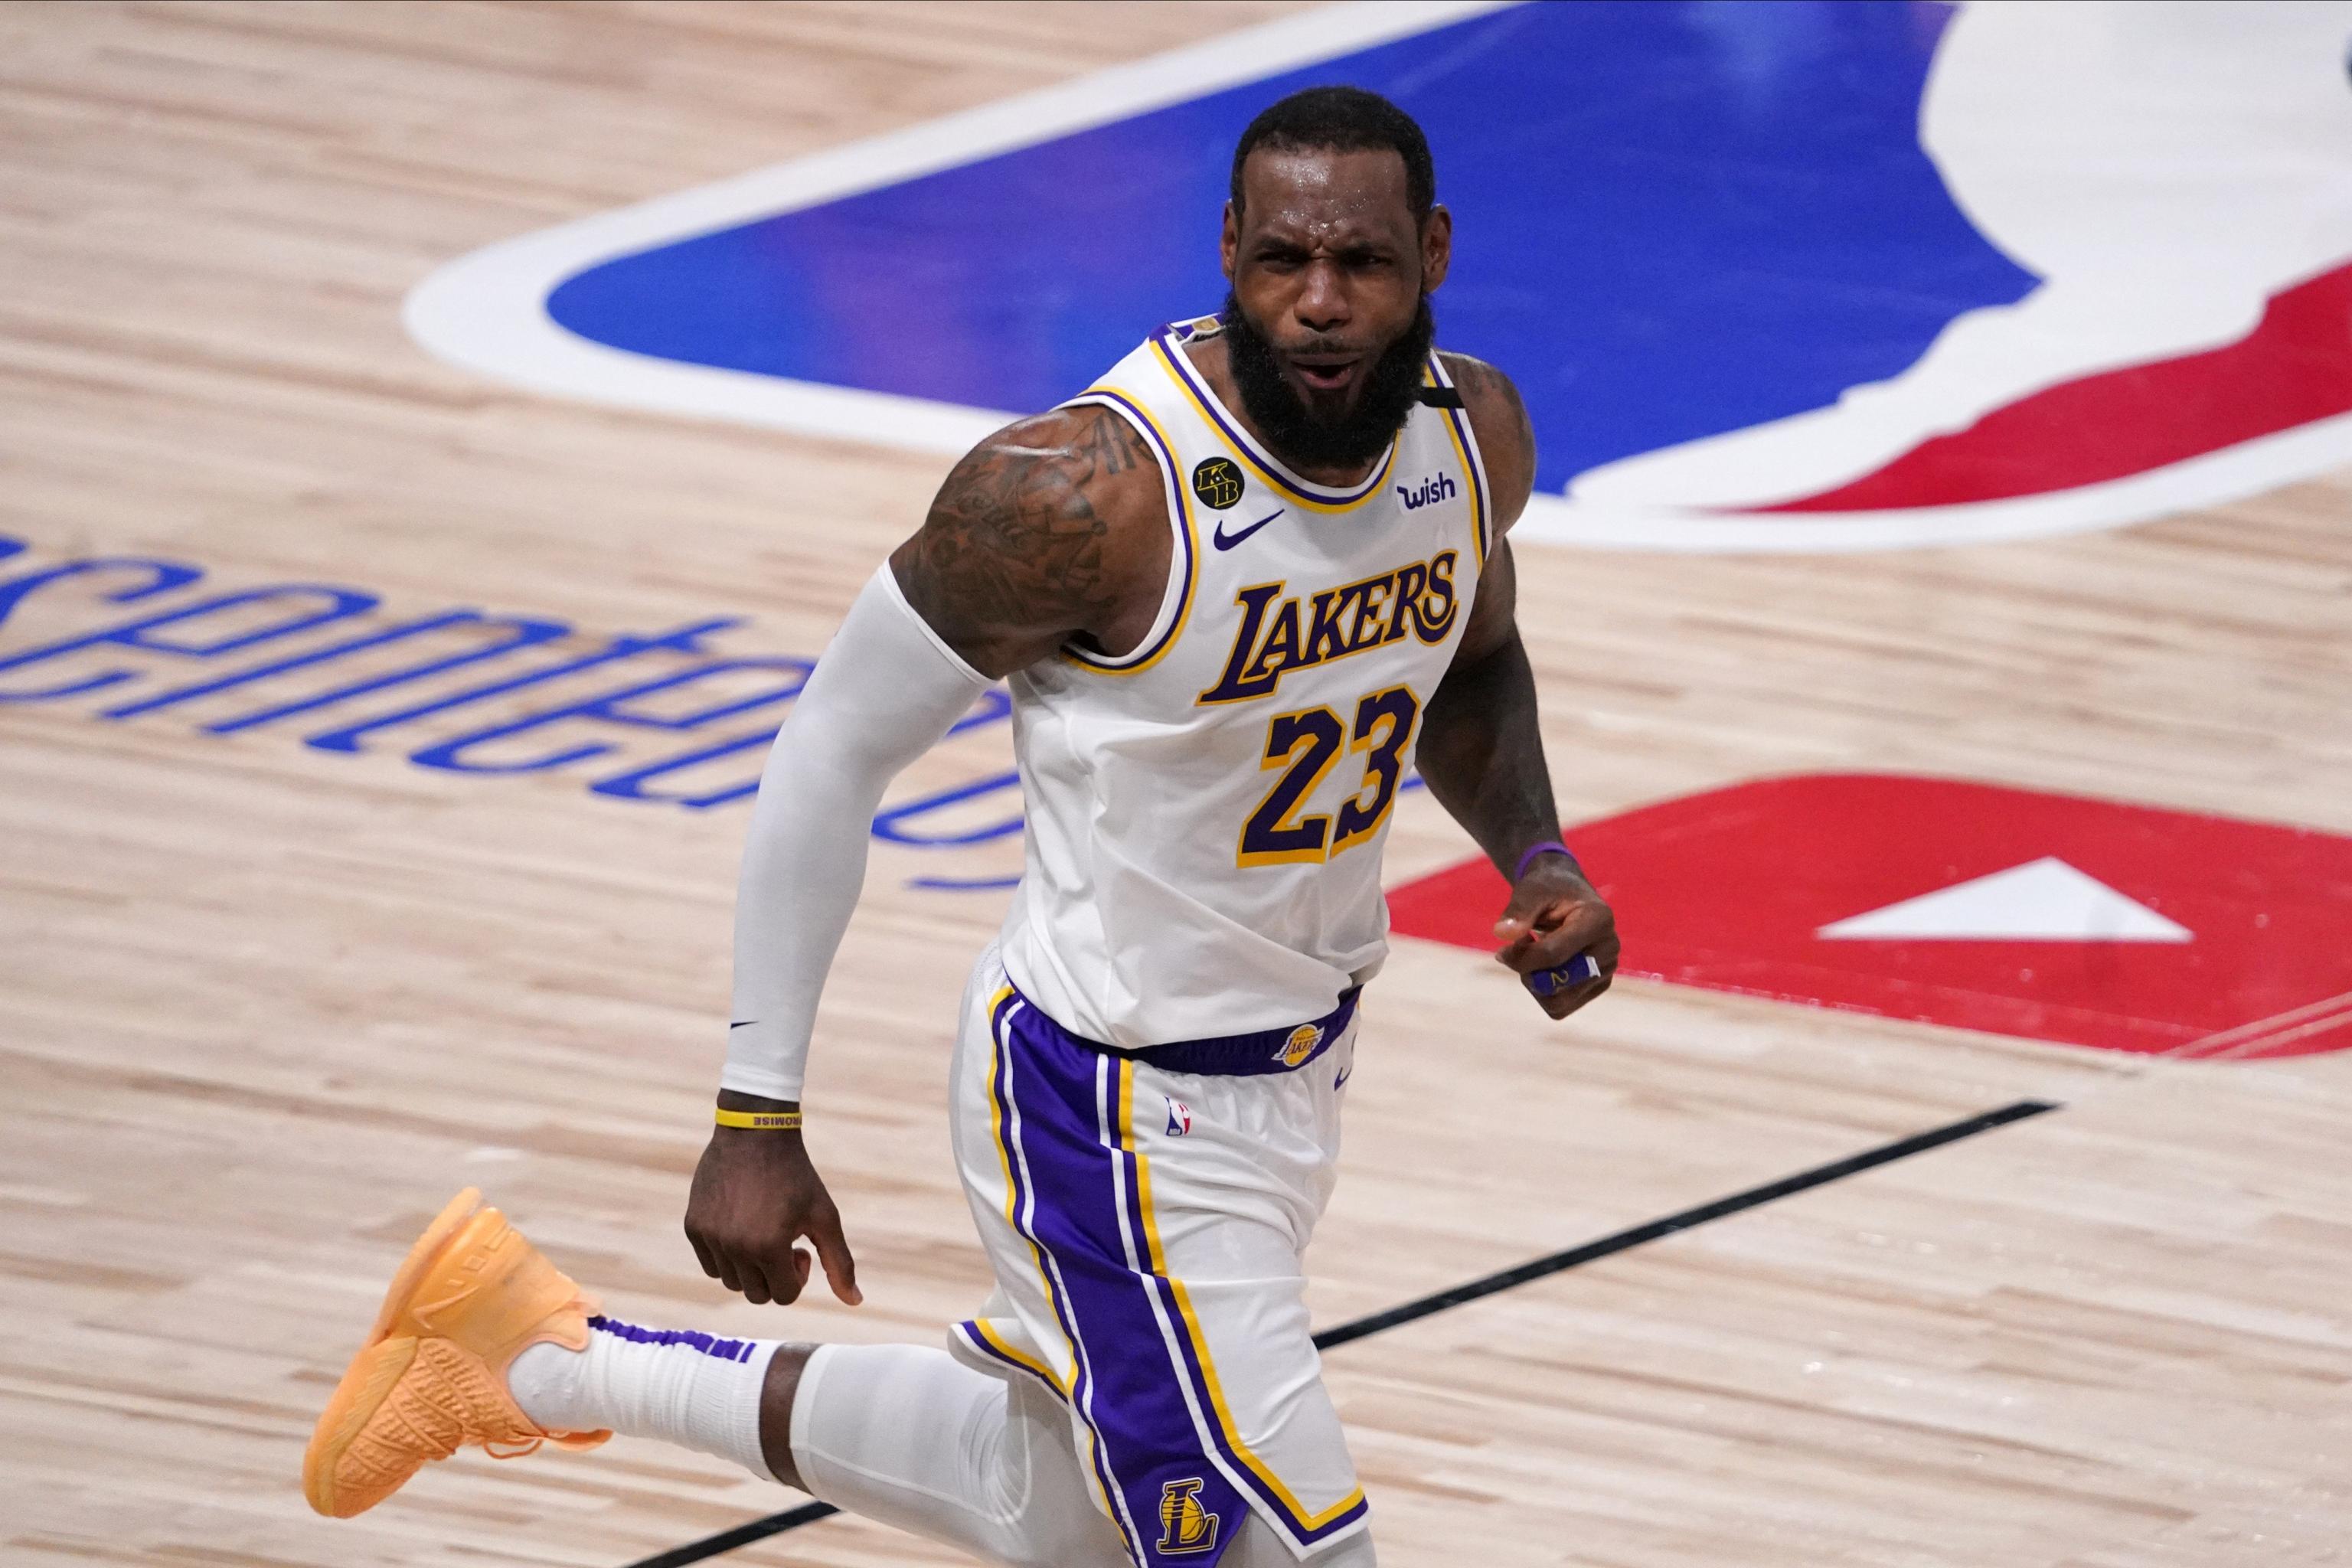 Lebron James Named Nba S Best Player Over Giannis In Survey Of Scouts Execs Bleacher Report Latest News Videos And Highlights